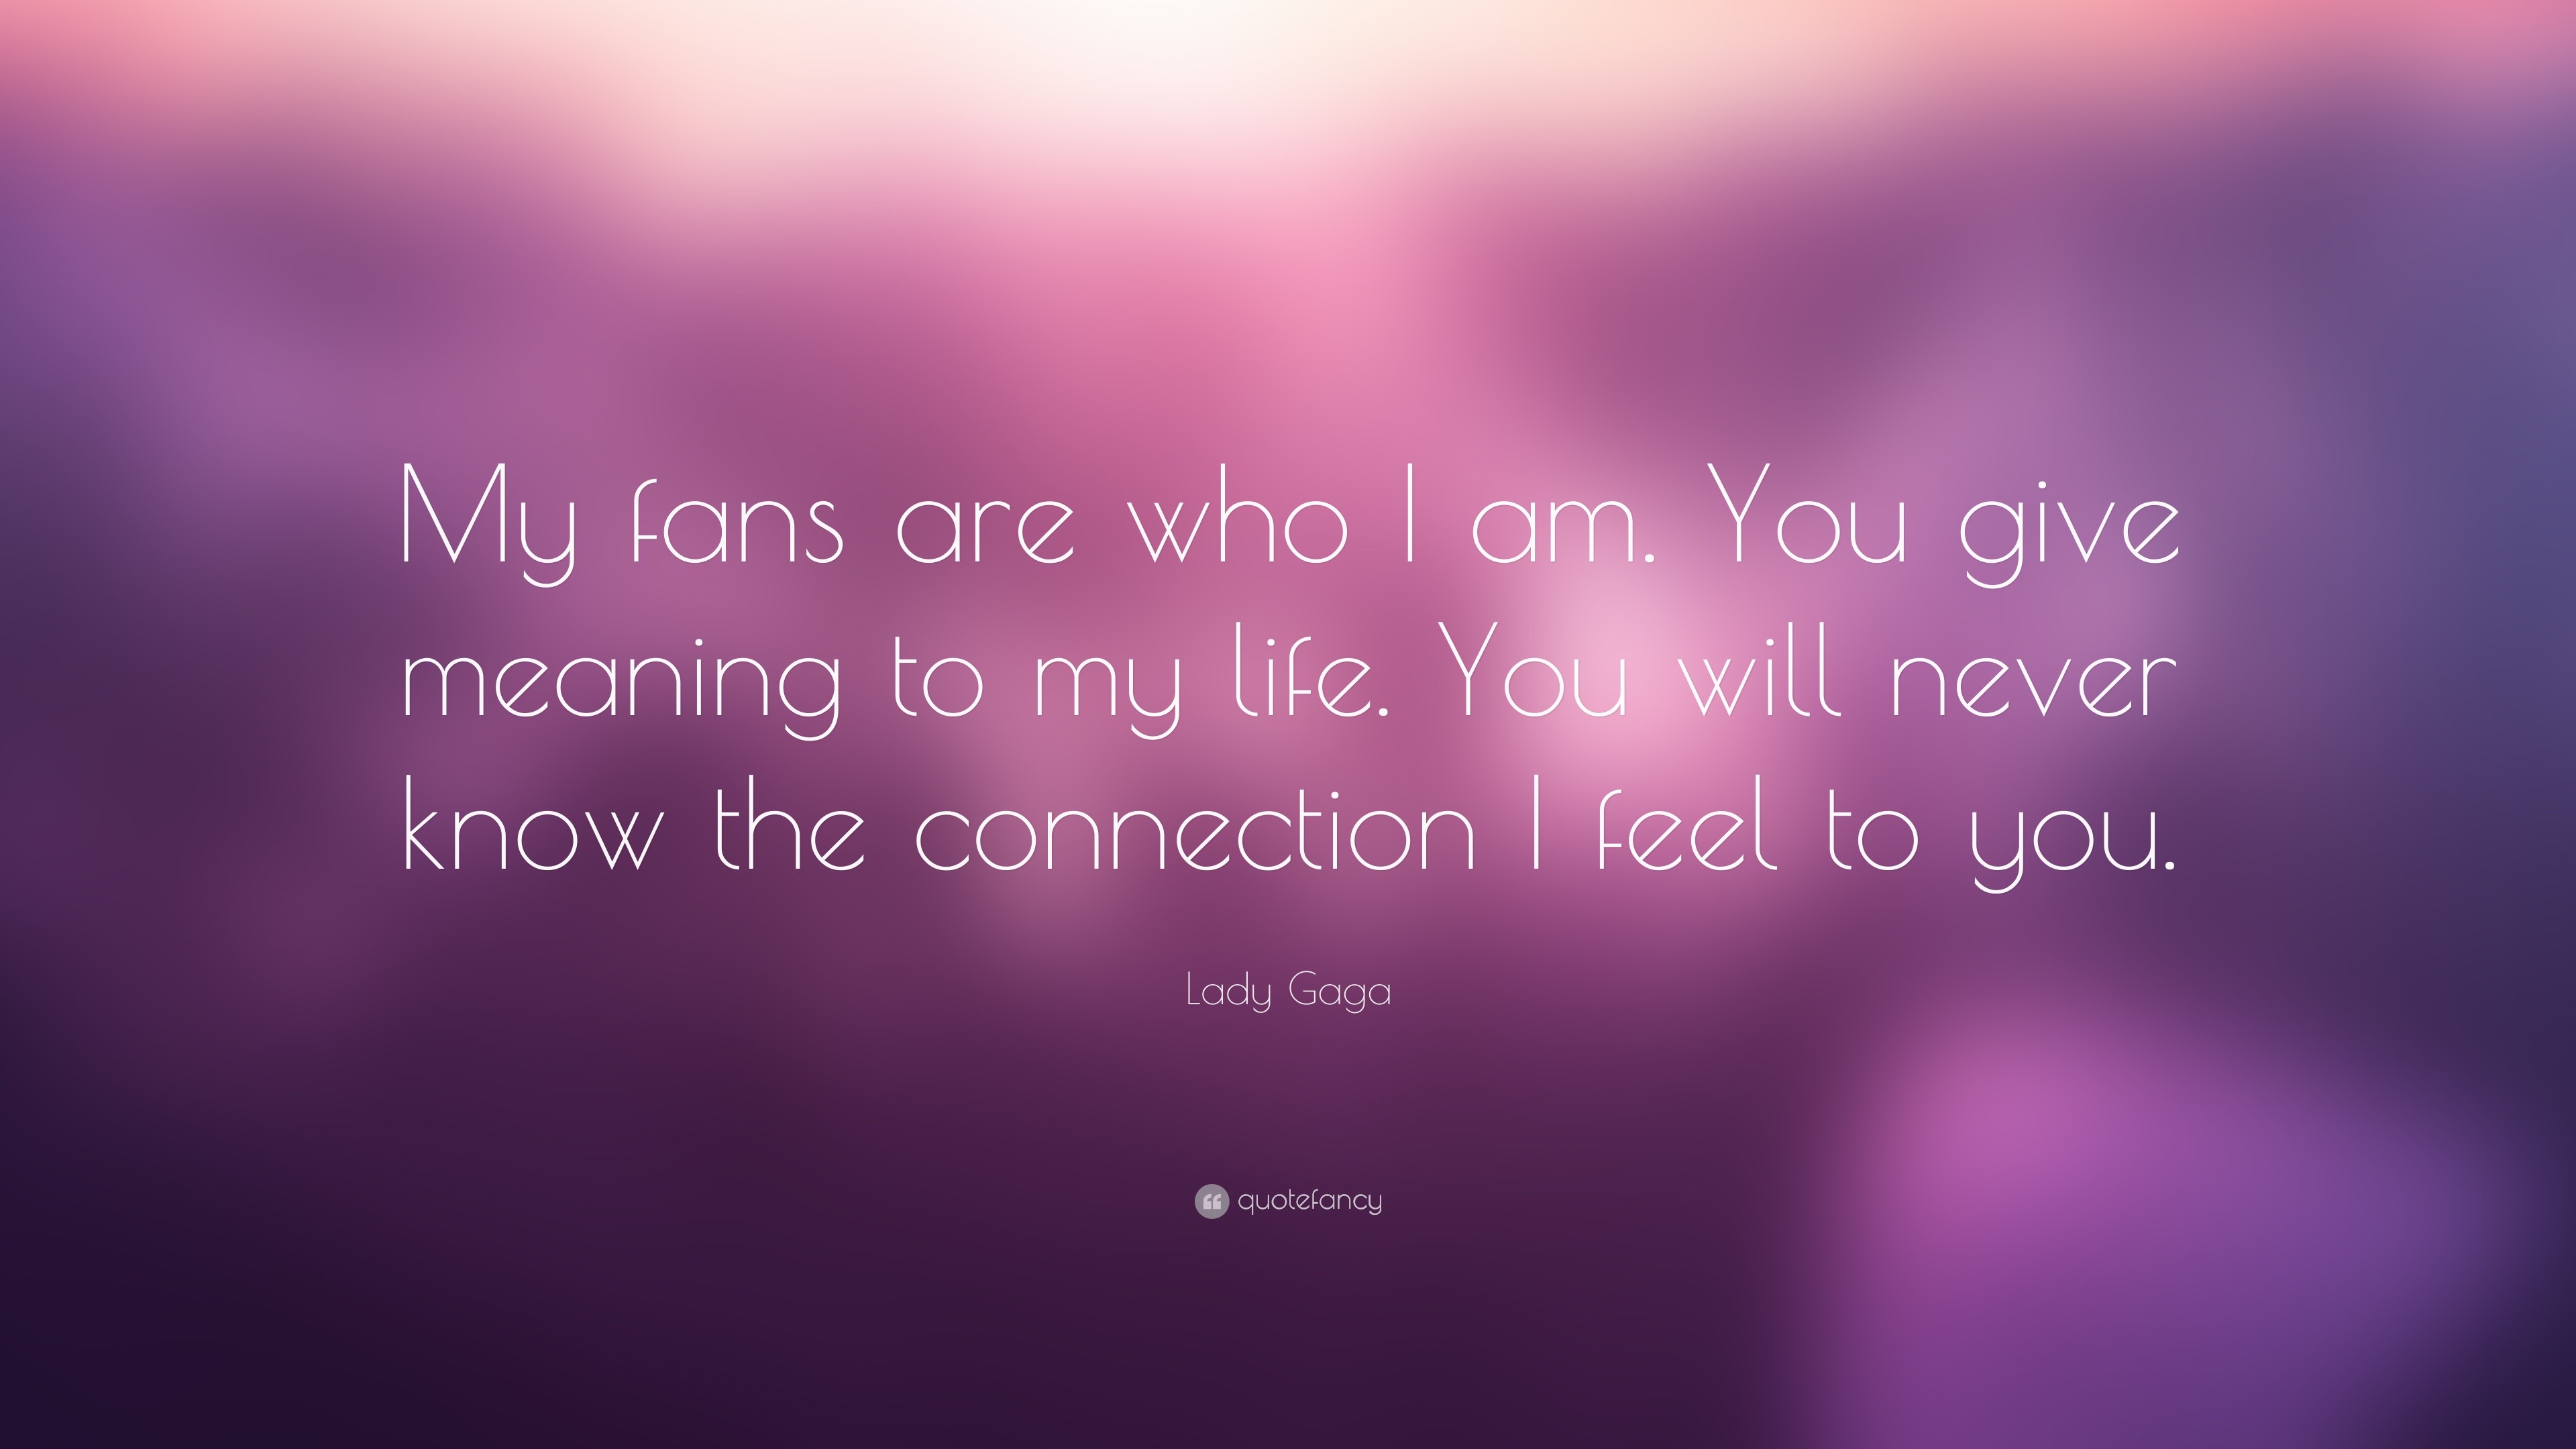 Lady Gaga Quote “My fans are who I am You give meaning to